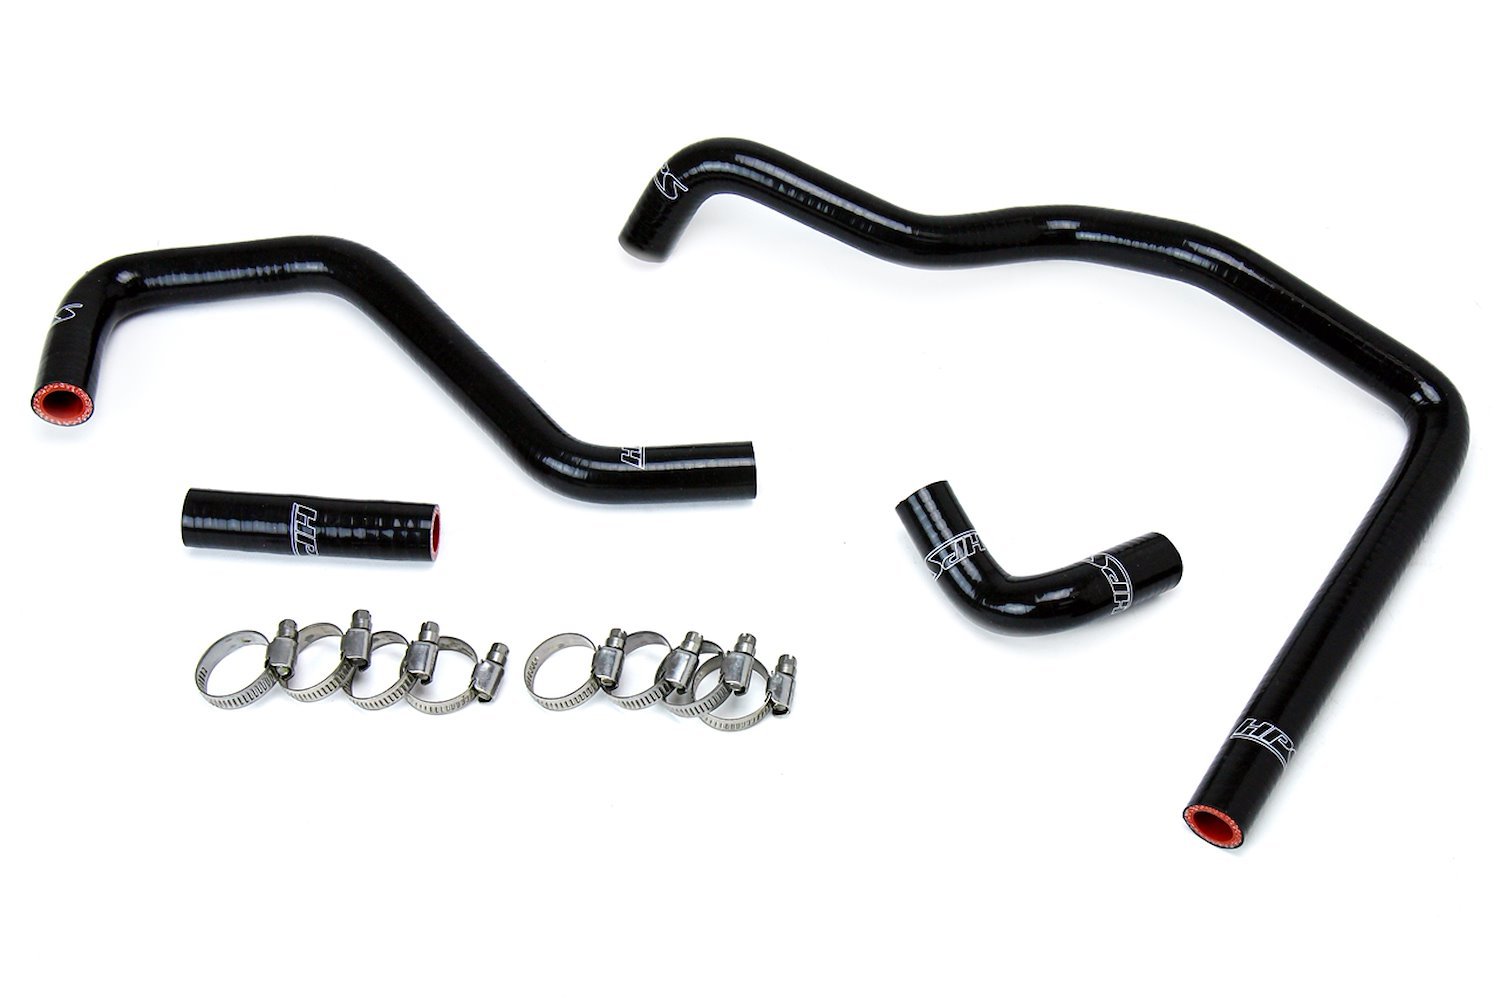 57-1587-BLK Heater Hose Kit, High-Temp 3-Ply Reinforced Silicone, Replace OEM Rubber Heater Coolant Hoses